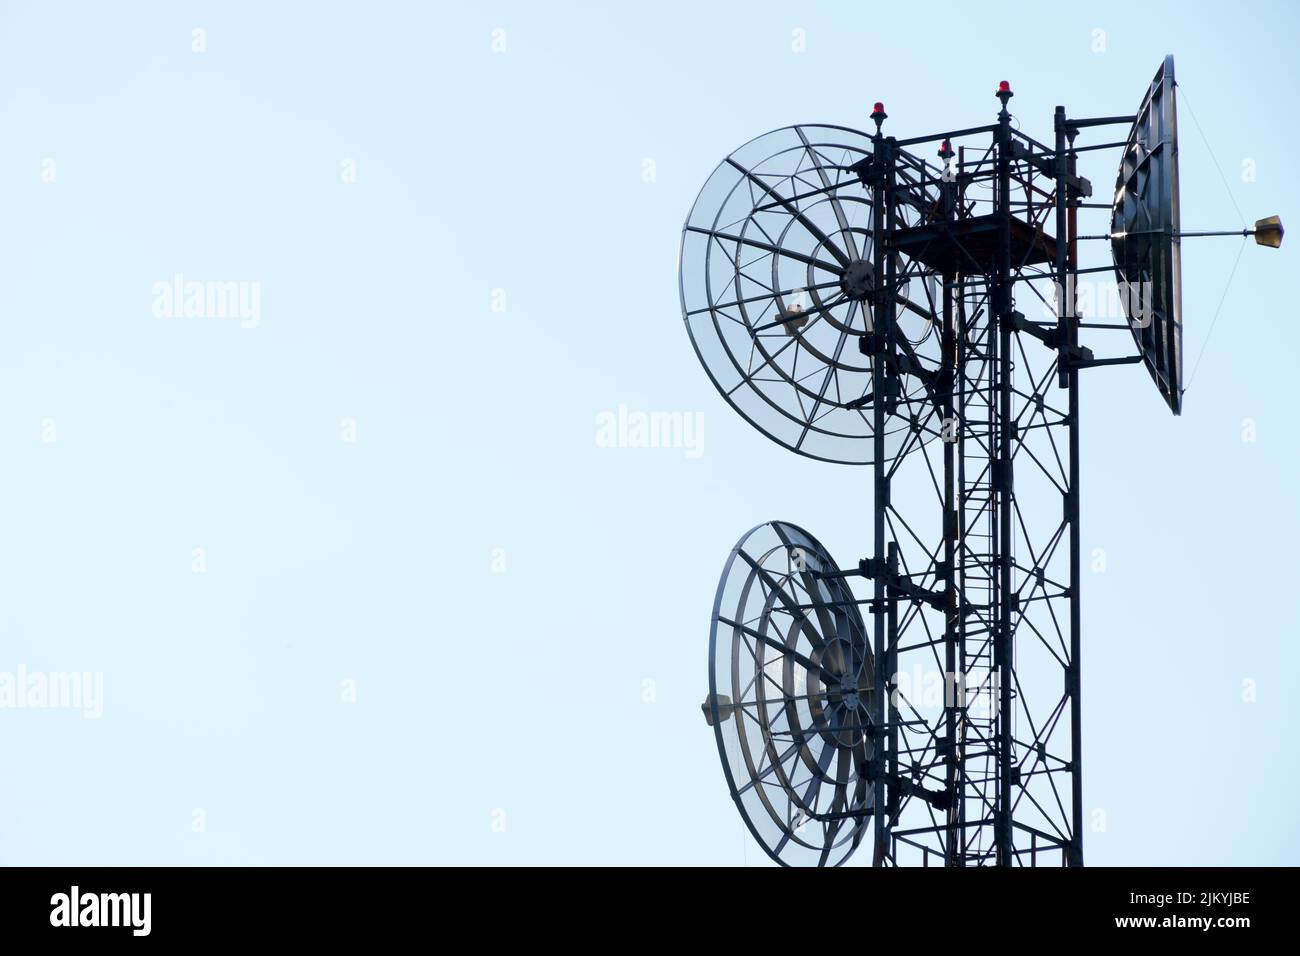 Pylon with round satellite dishes for transmission and repetition of TV signals isolated on homogeneous sky background with copy space Stock Photo